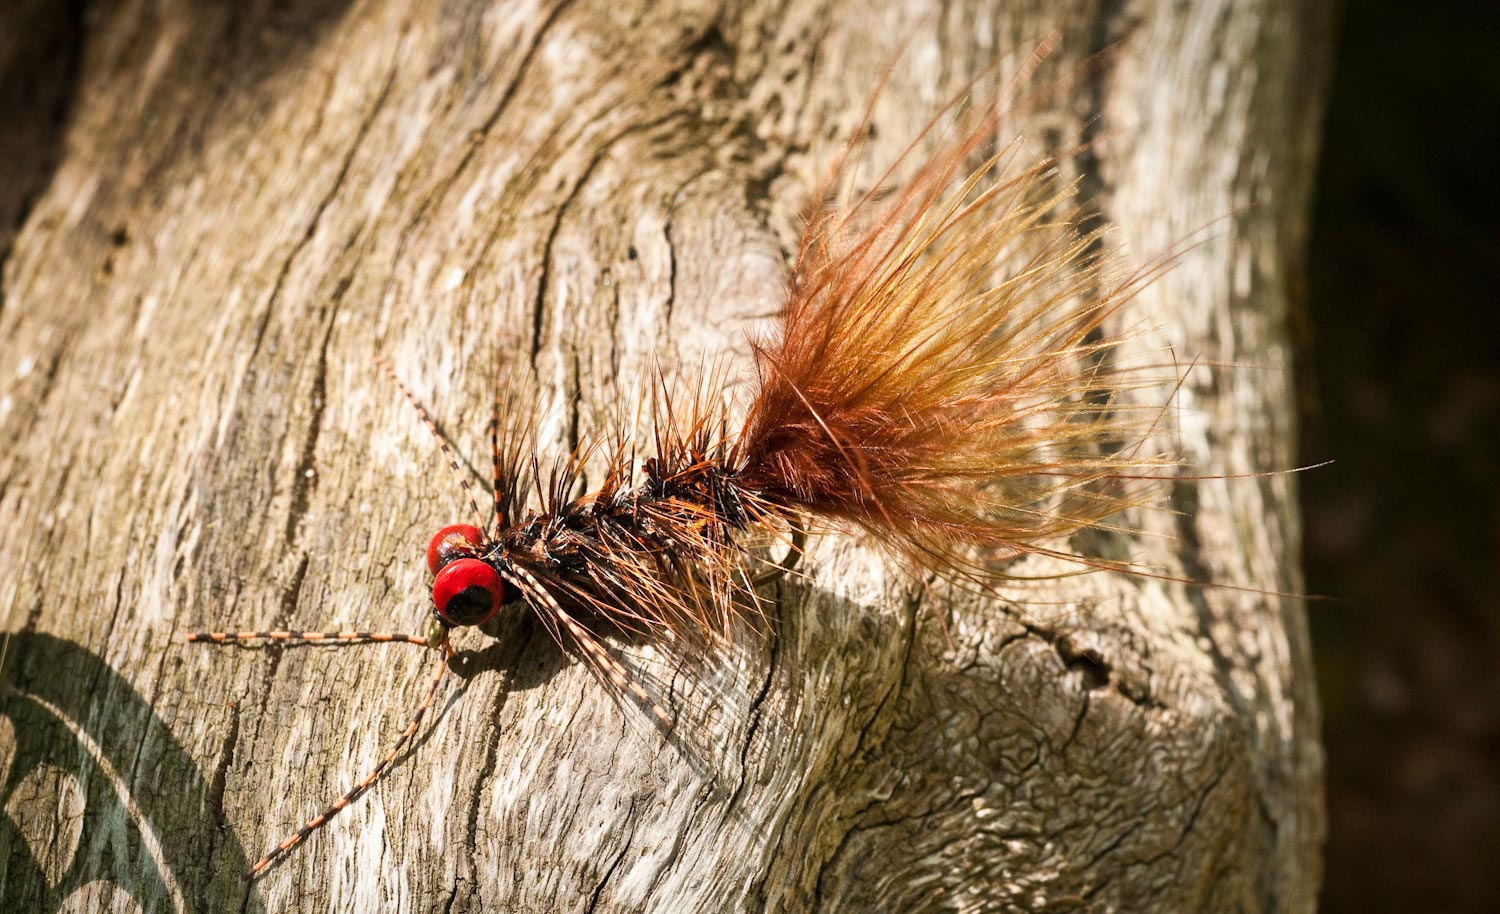 Fly Fishing: The Woolly Bugger Isn't all that, Or is it? - Fly